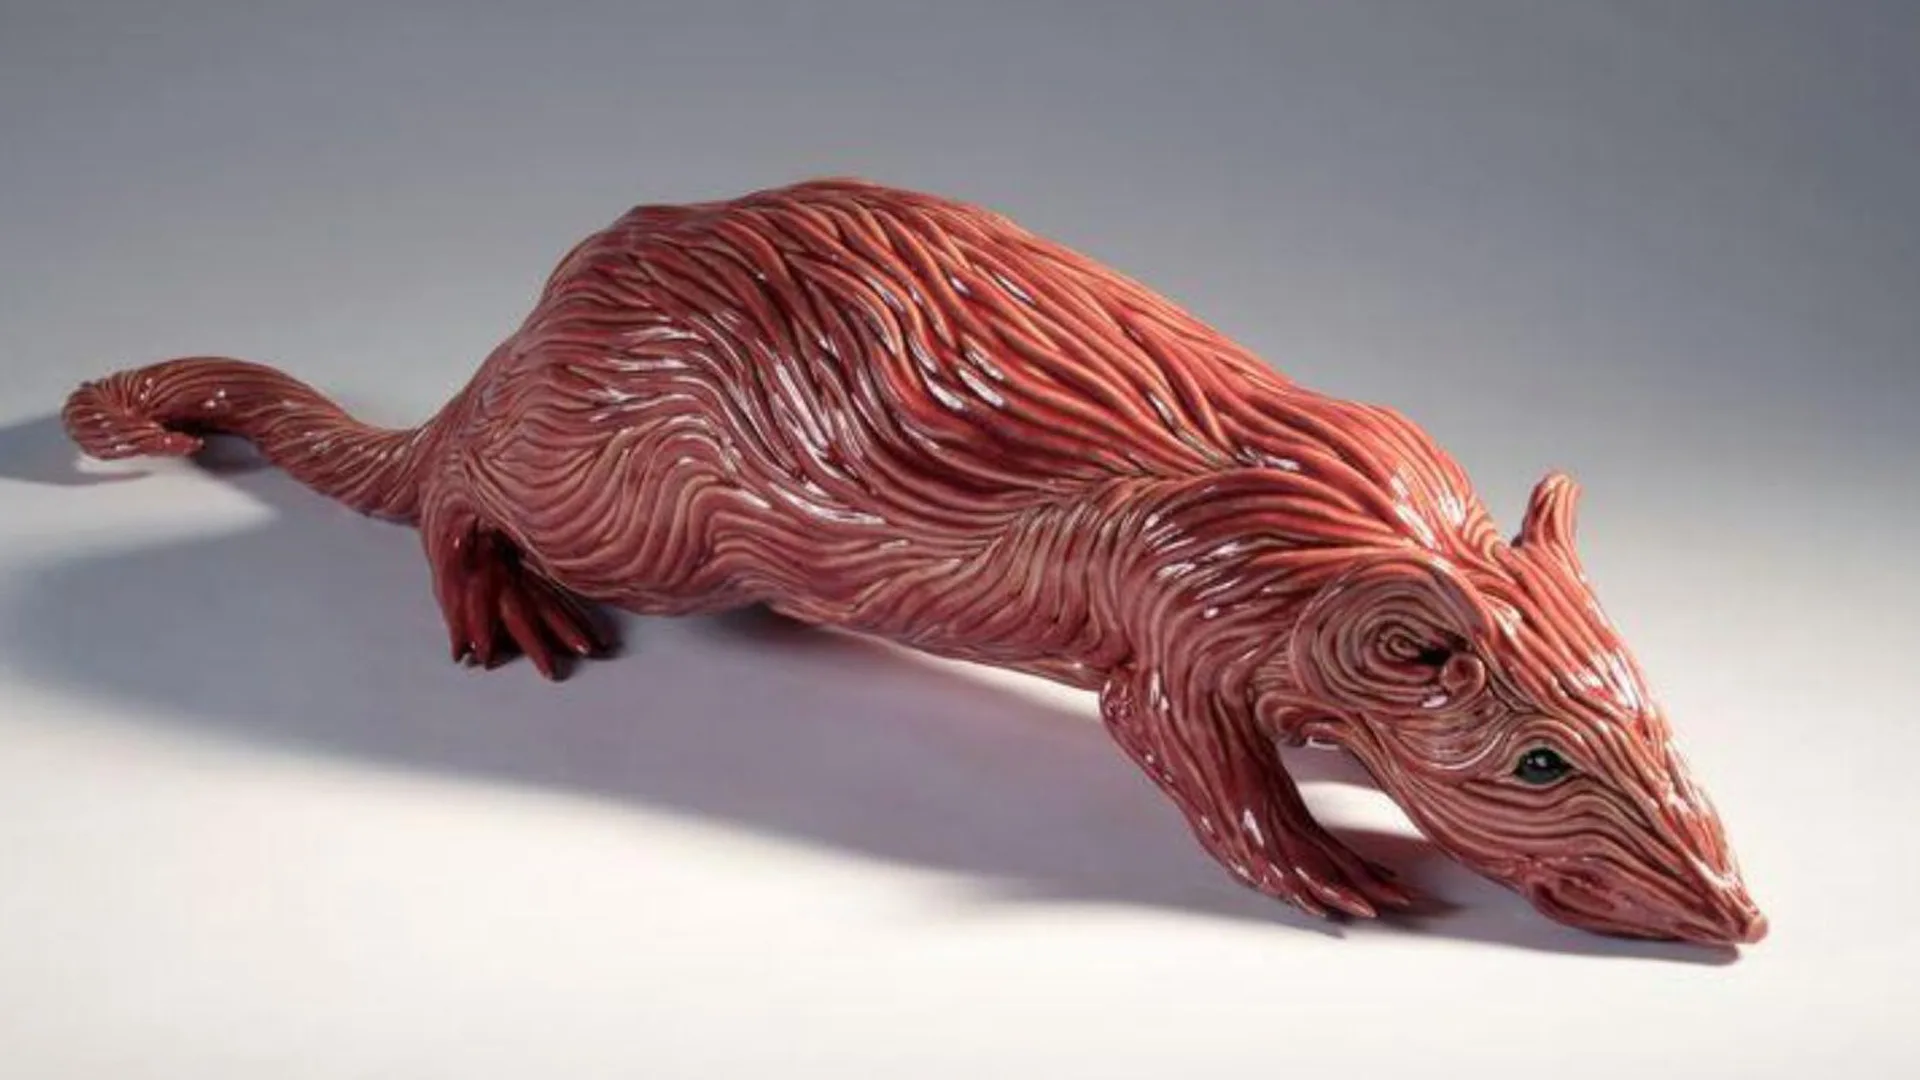 A photo of a V&A object of a ceramic rat with a red glaze on a white background